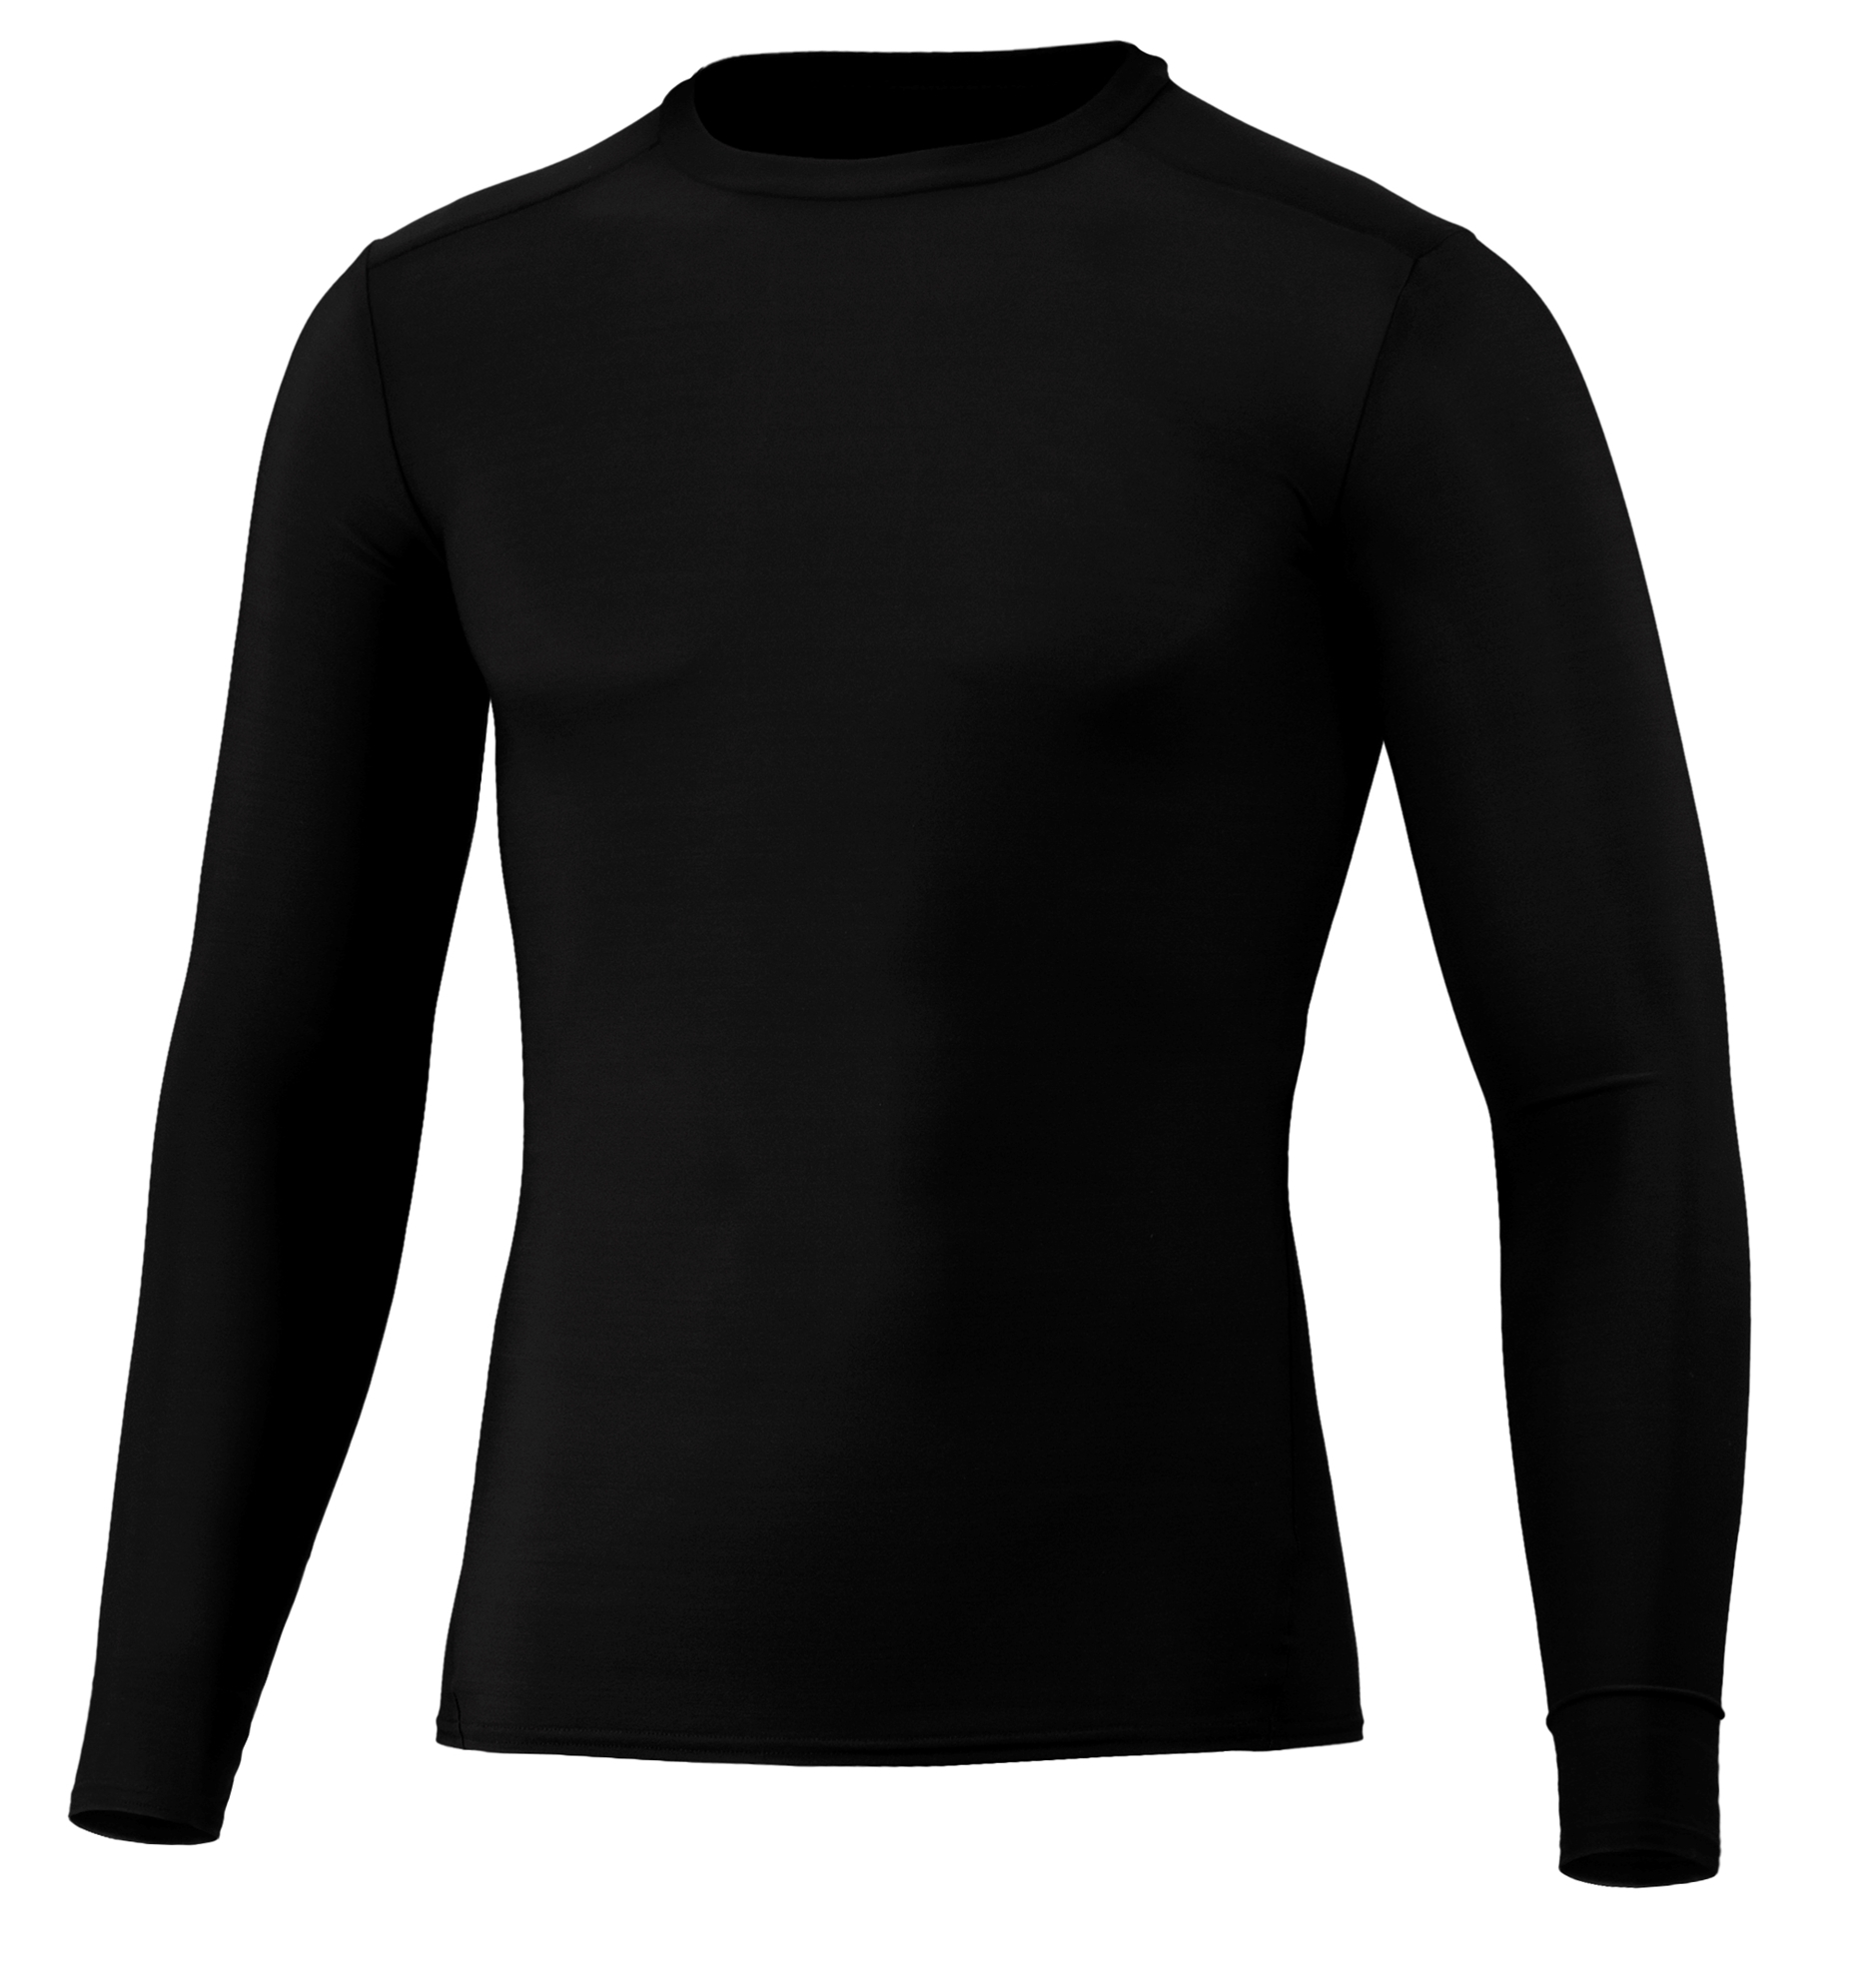 BAW Athletic Wear CT102 - Men's Compression Long Sleeve T-Shirt $15.40 ...